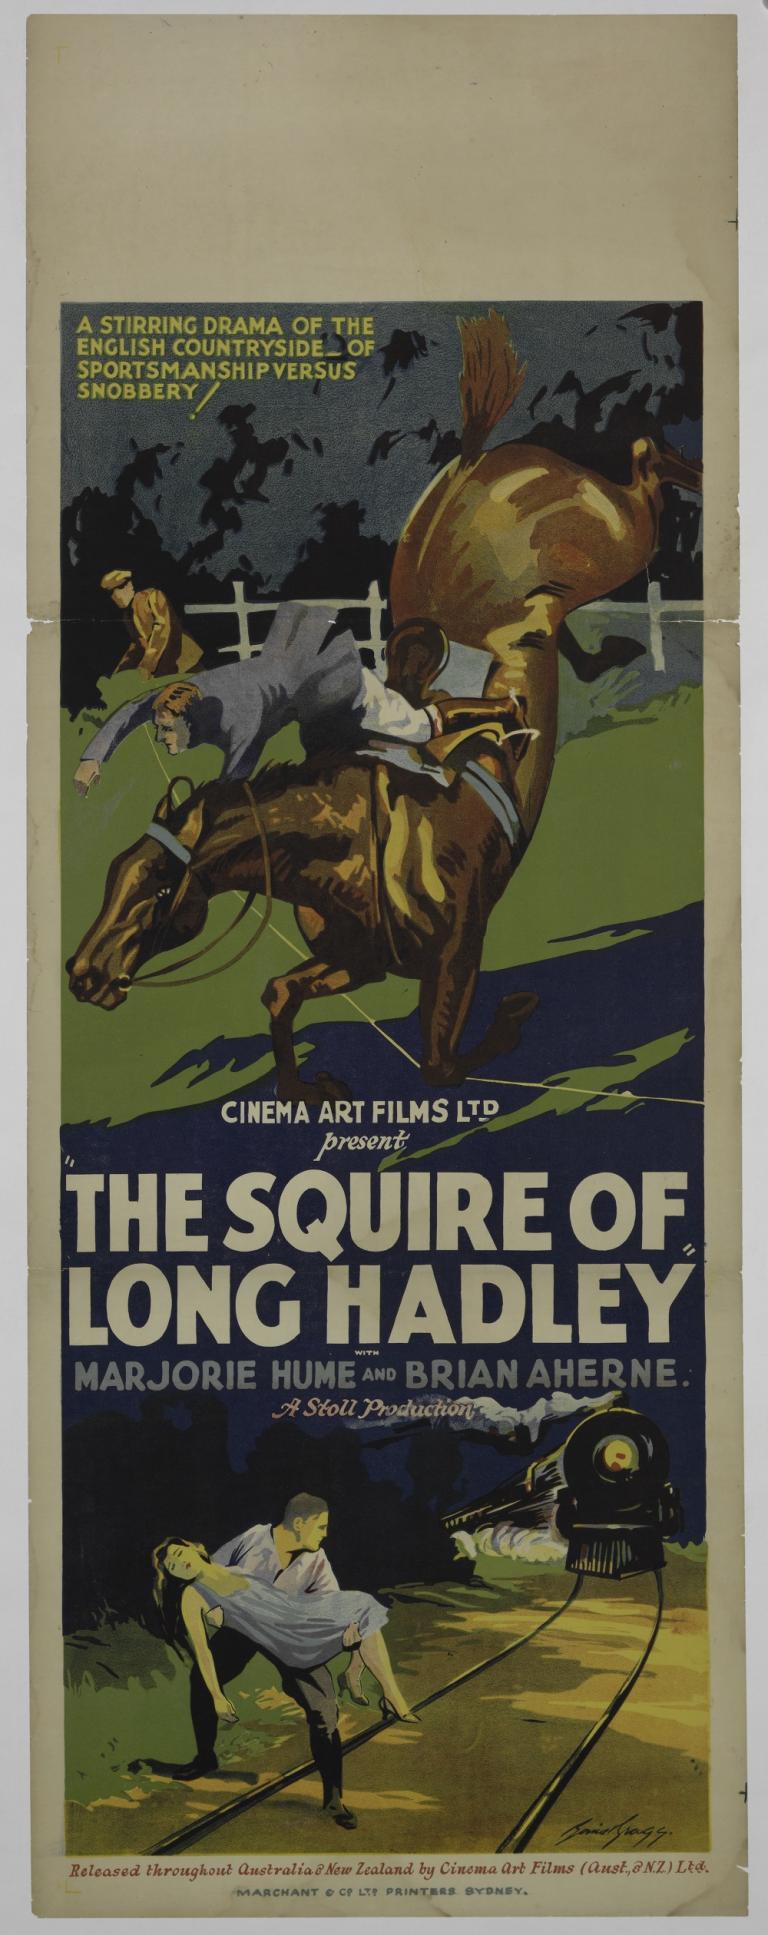 Thos poster design focuses on two perilous situations: a man being thrown off a horse after it stumbles on a trip wire and an unconscious woman being rescued from an oncoming train. 